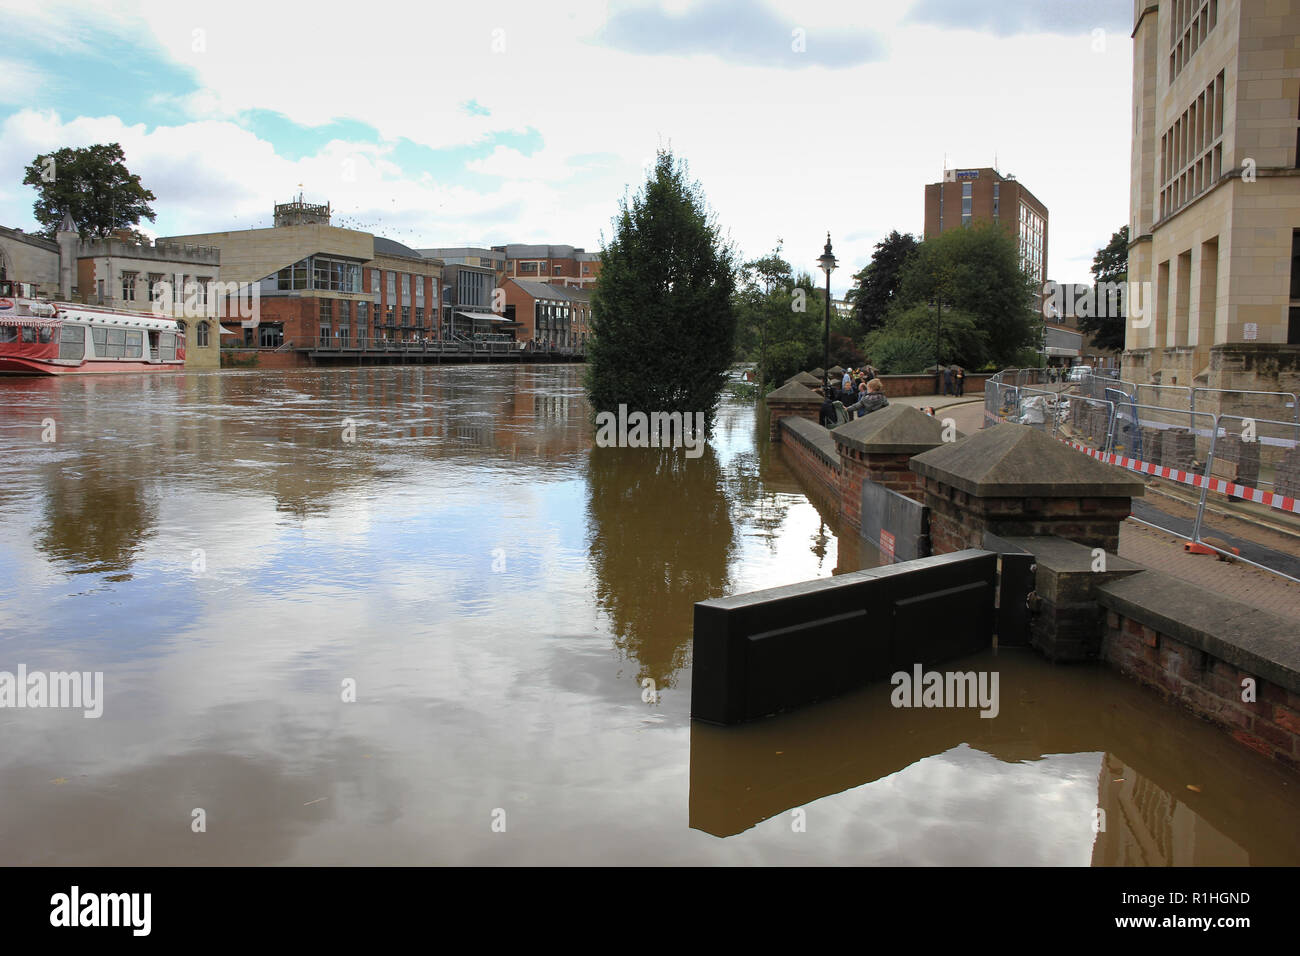 Heavy flooding as seen from the Aviva building in York, North Yorkshire. Stock Photo